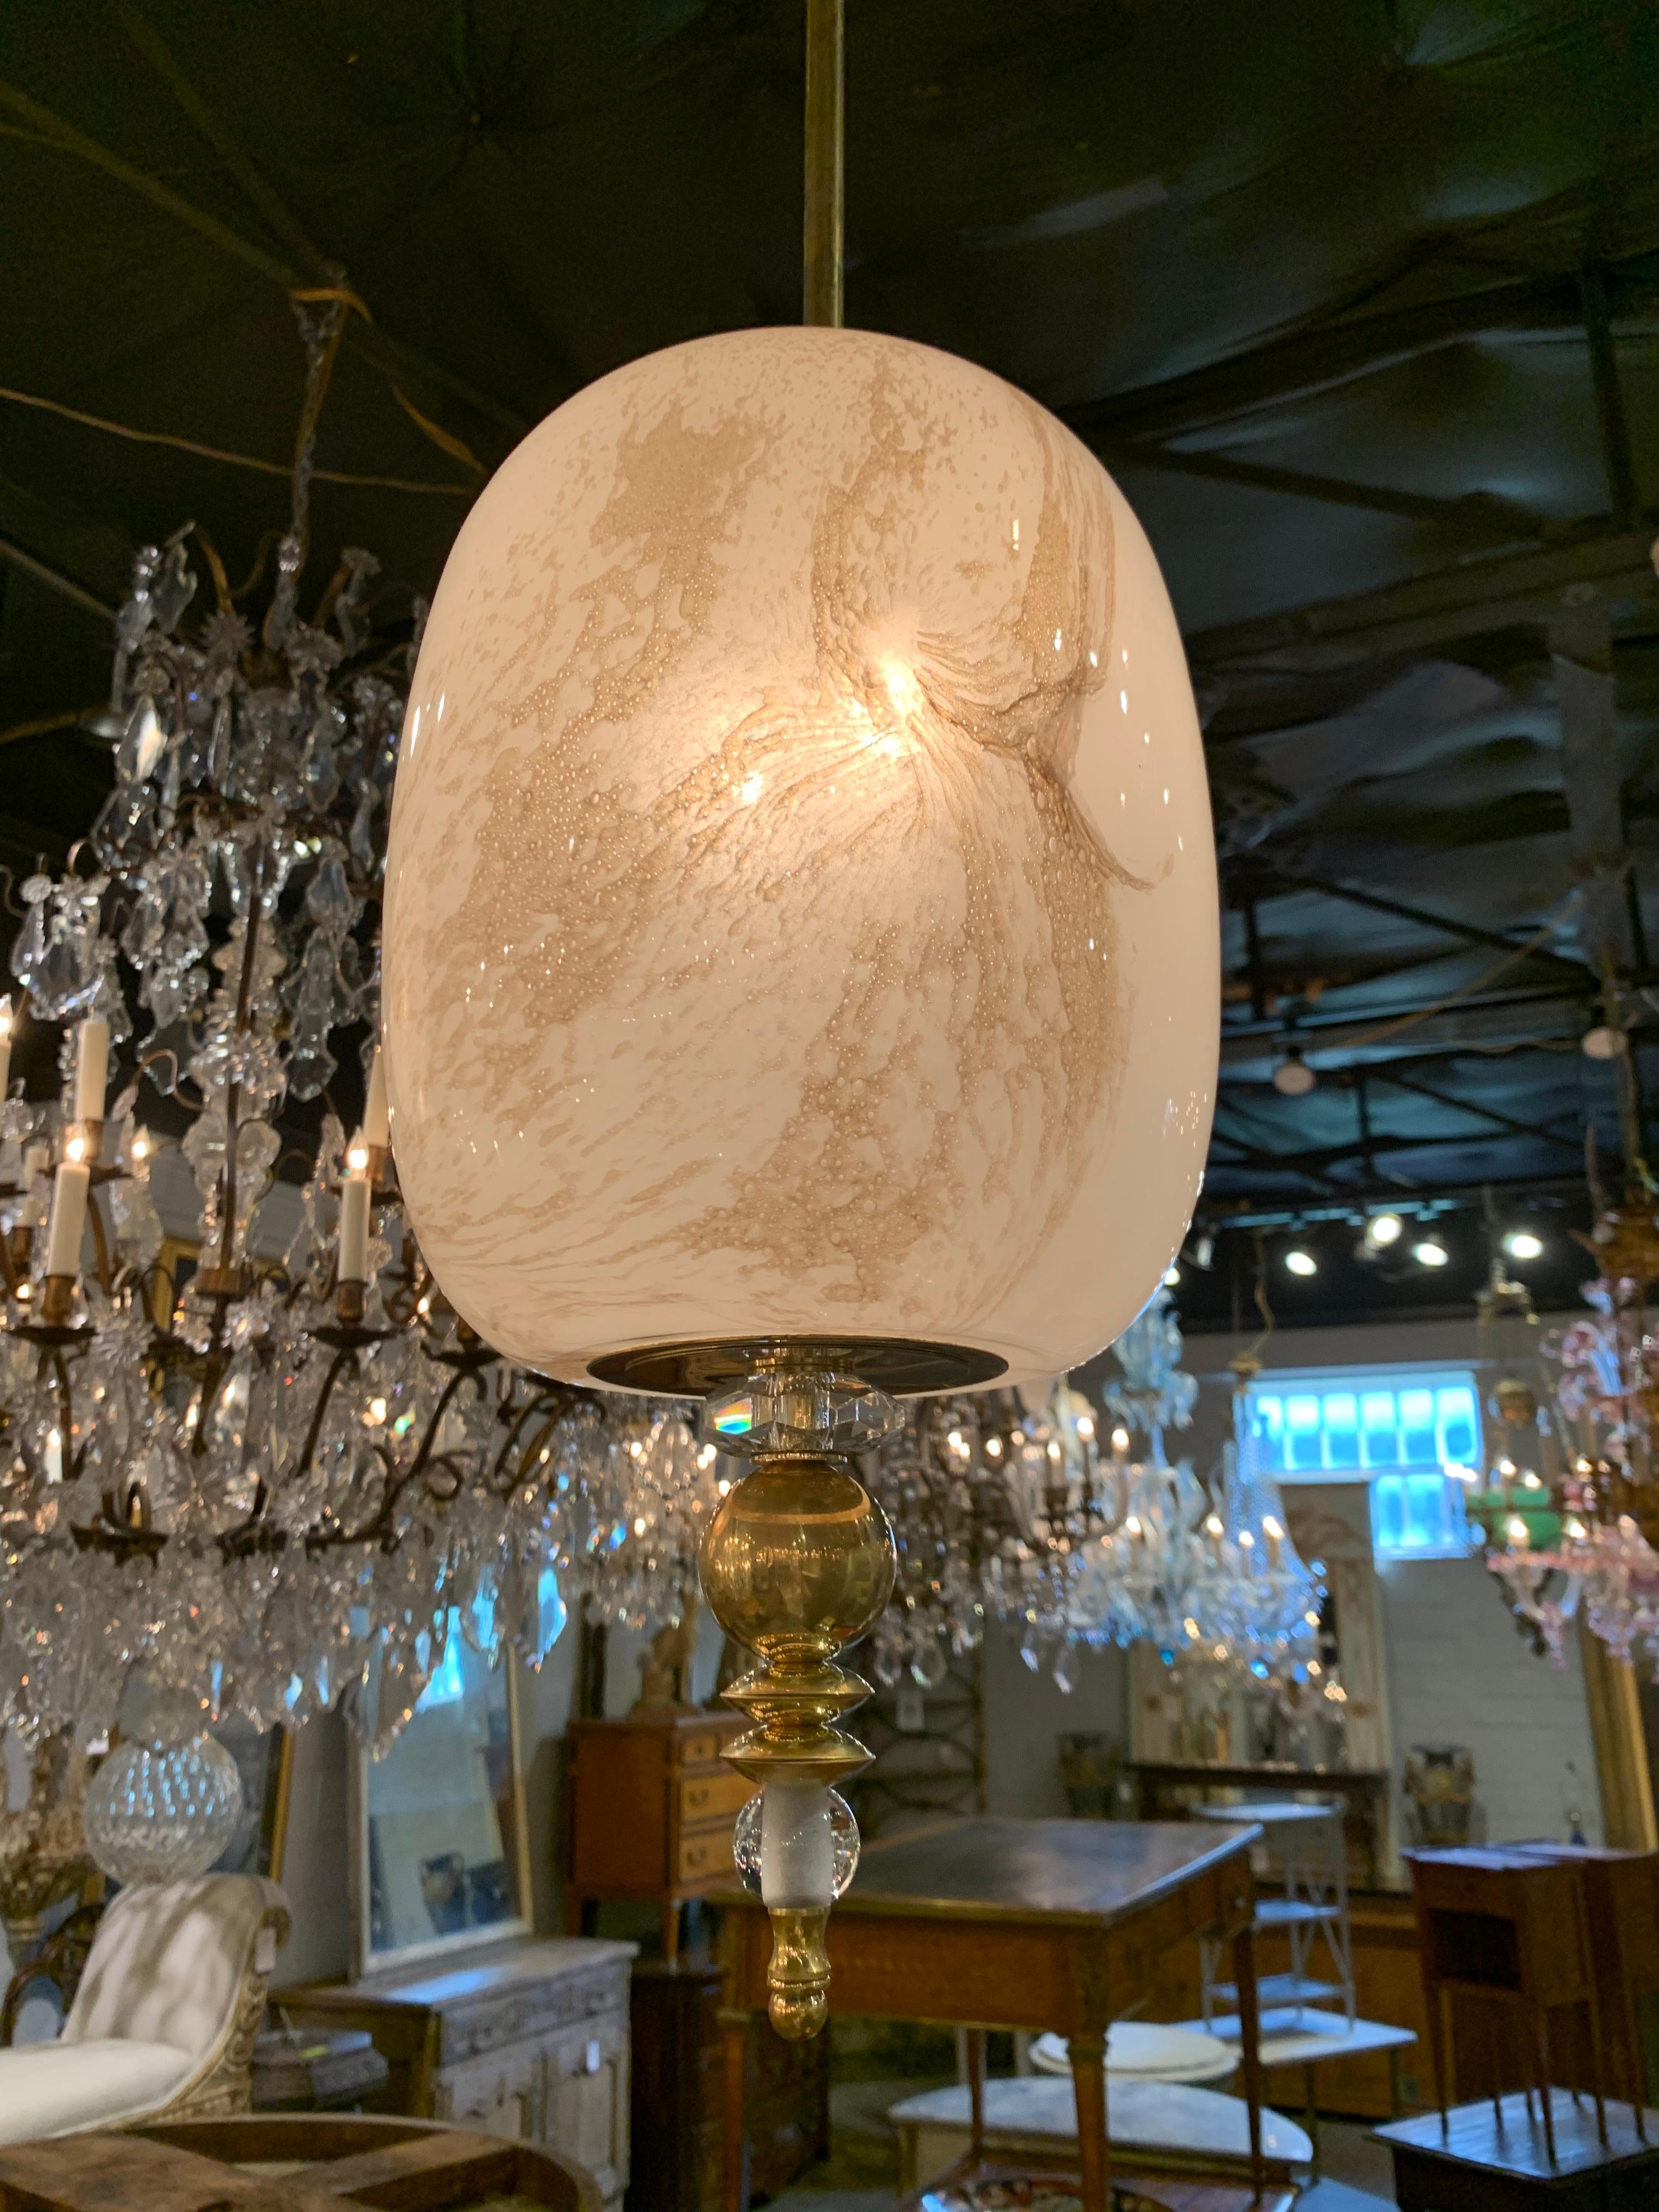 Outstanding modern Murano glass pendant fixtures. Beautifully swirling pattern of gold and white with brass details. Sold separately but pairs are available. True works of art. Fantastic!